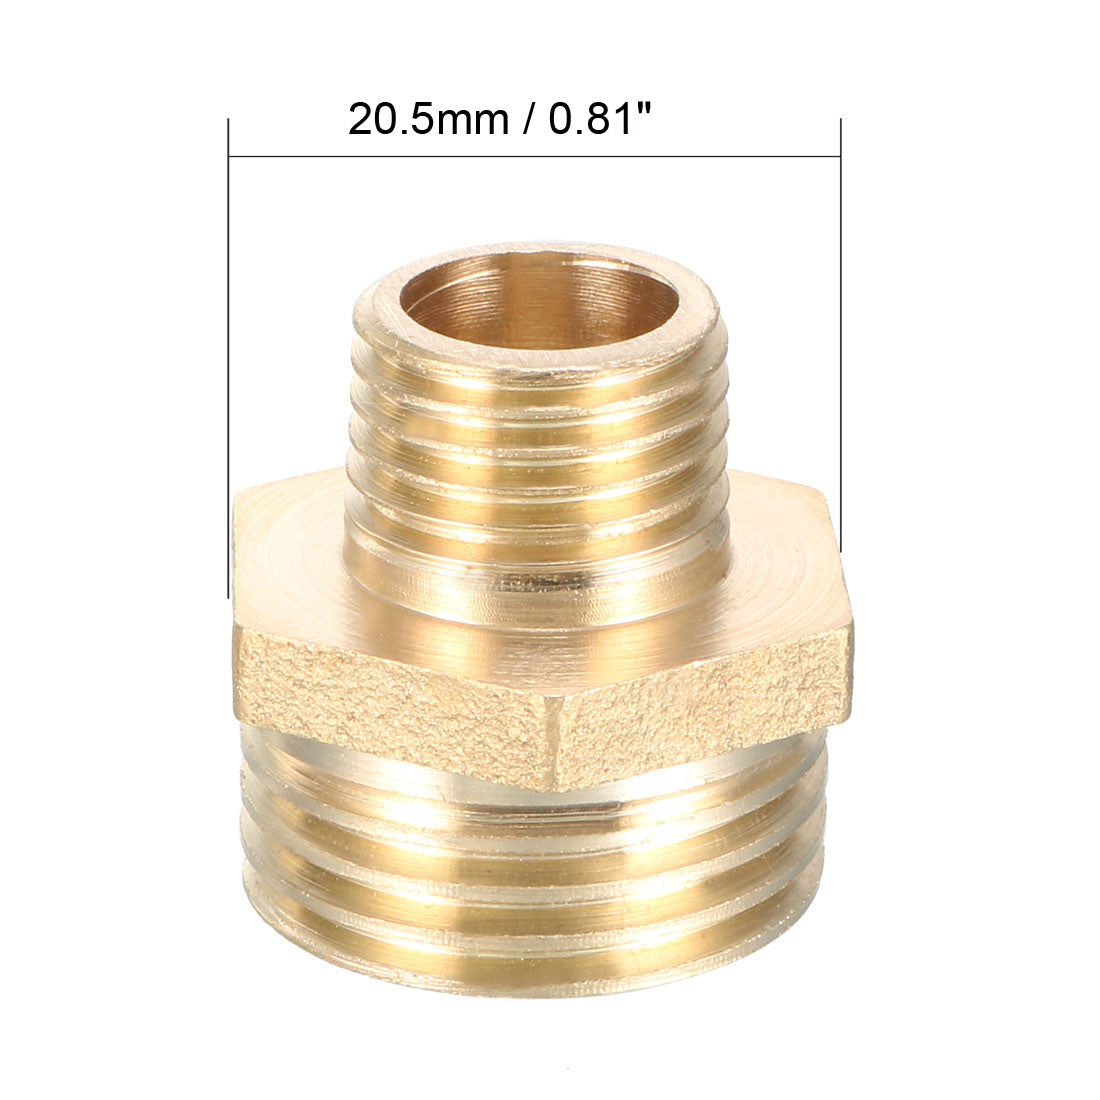 uxcell Uxcell Brass Pipe Fitting Reducing Hex Bushing 1/2 BSP Male x 1/4 BSP Male Adapter 2pcs